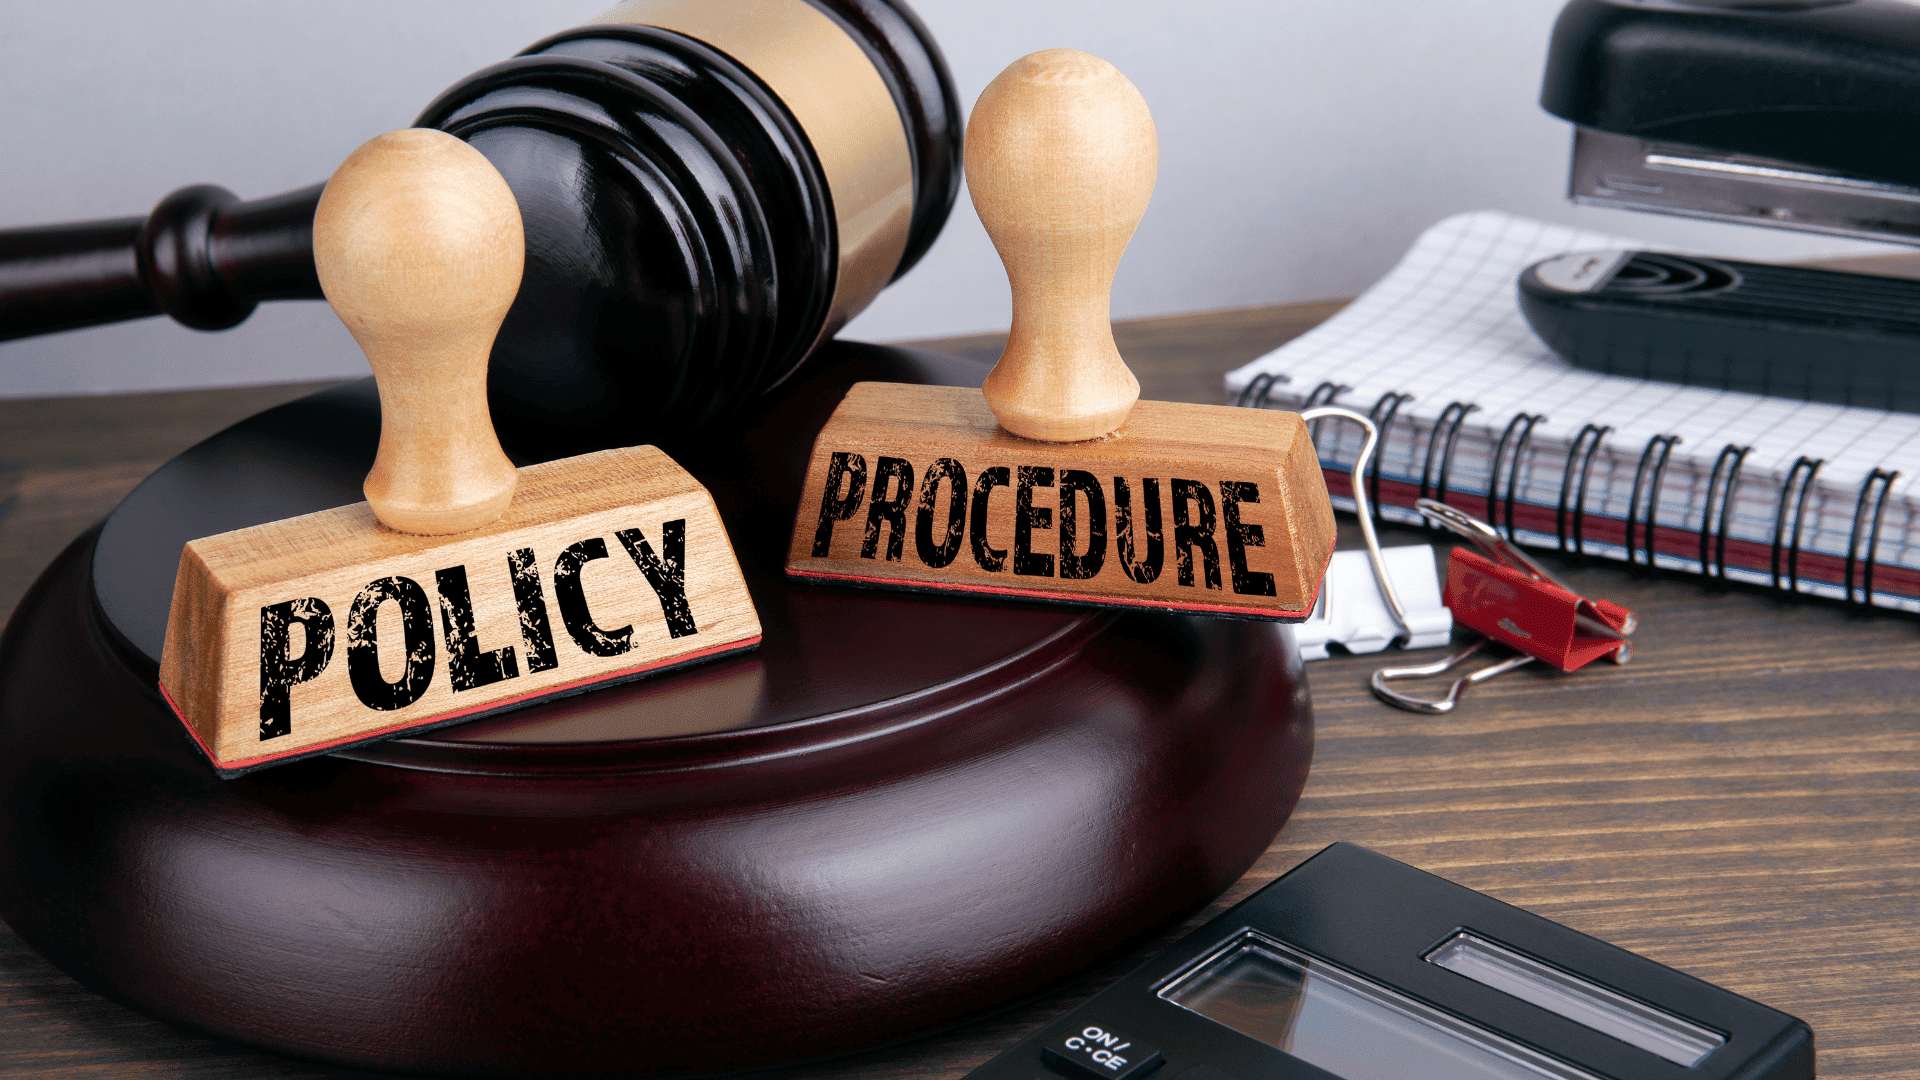 HR Policies And Procedures: A Step by Step Guide To Developing Good HR